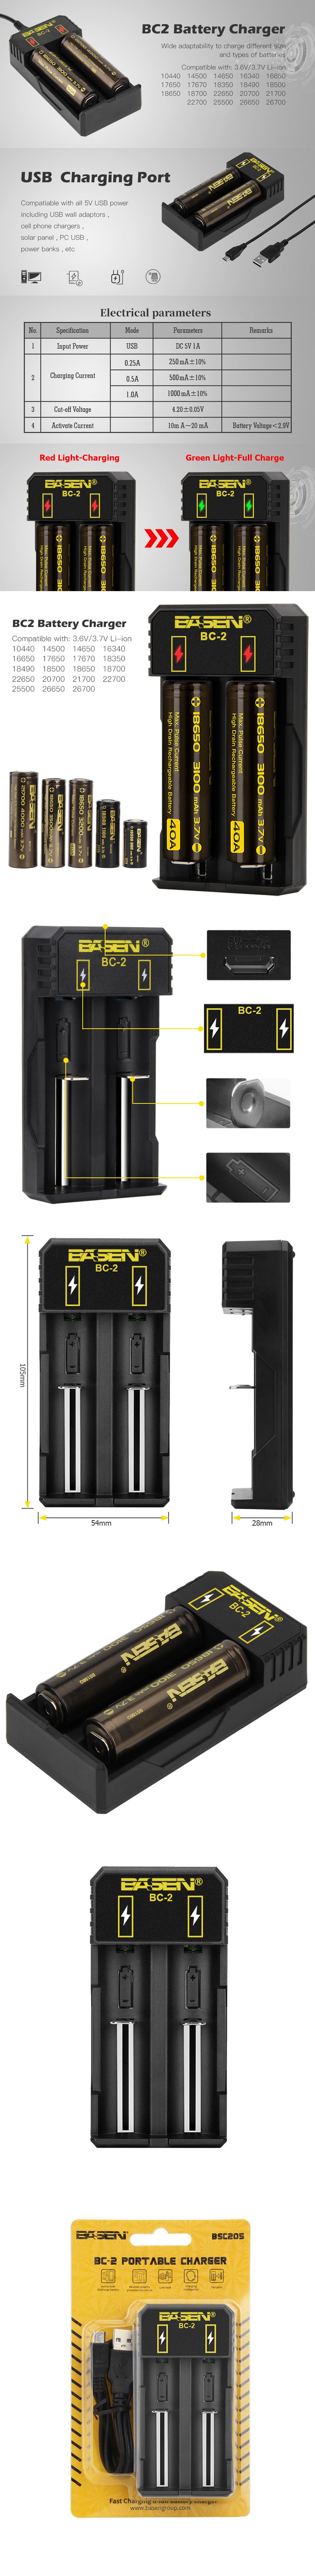 BASEN-BC-2-DC-5V-1A-Fast-Charging-Universal-Battery-Charger-LED-Flashlight-Li-ion-Battery-Charger-Fo-1682176